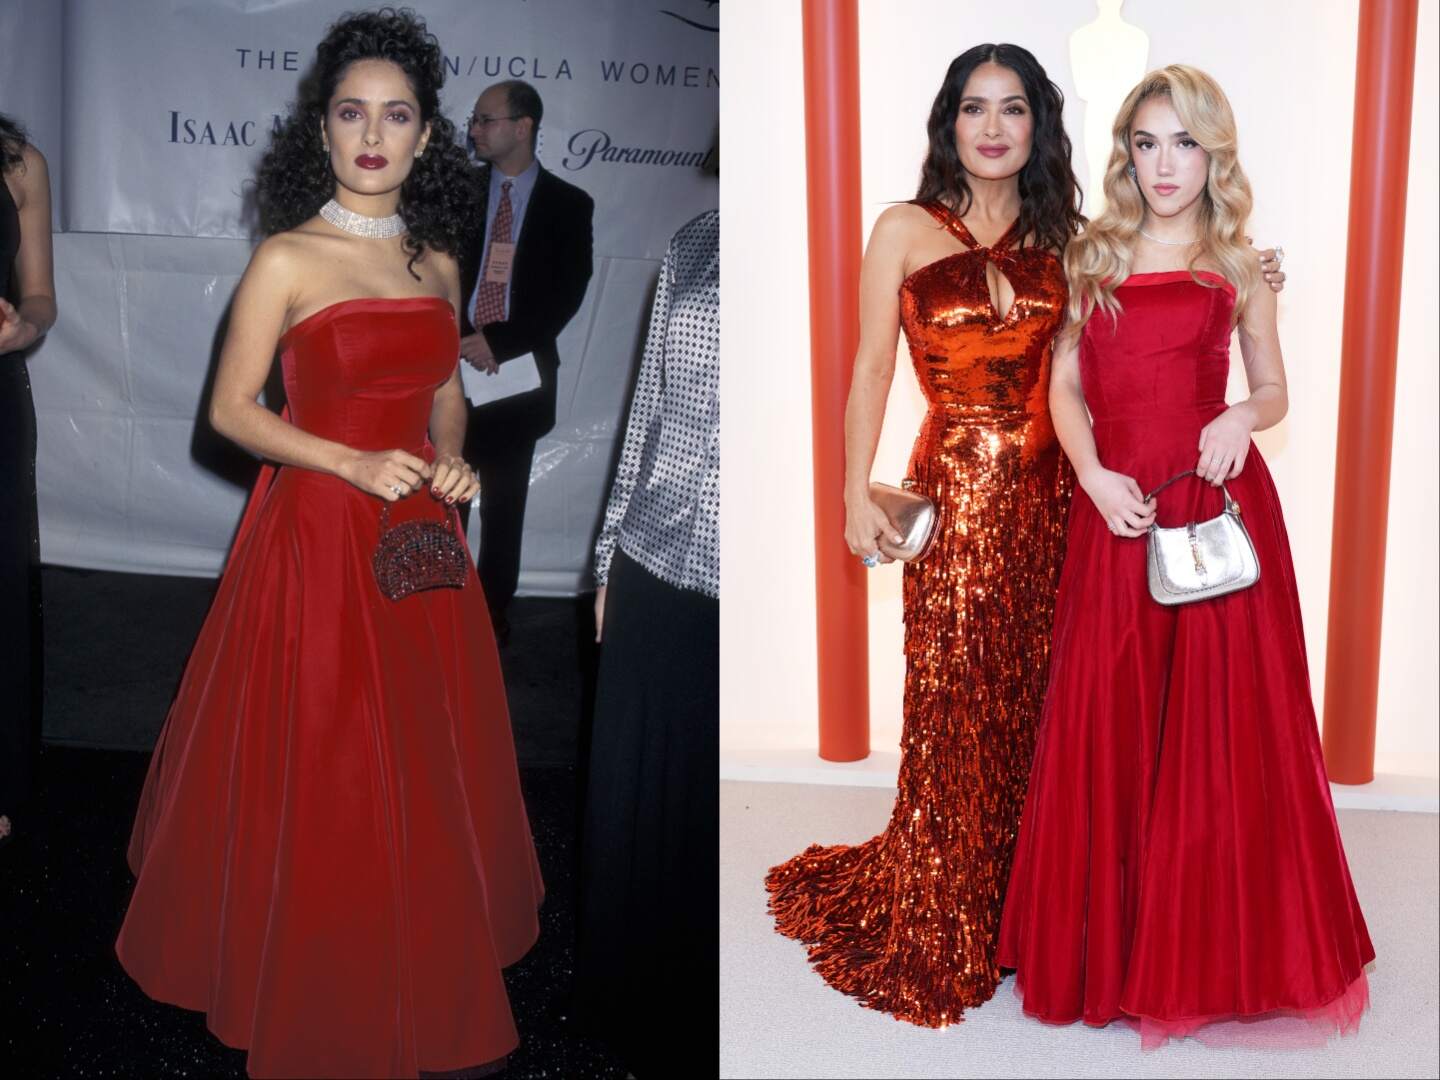 A photo of Salma Hayek wearing a red dress alongside a photo of Salma's daughter wearing the same red dress 25 years later